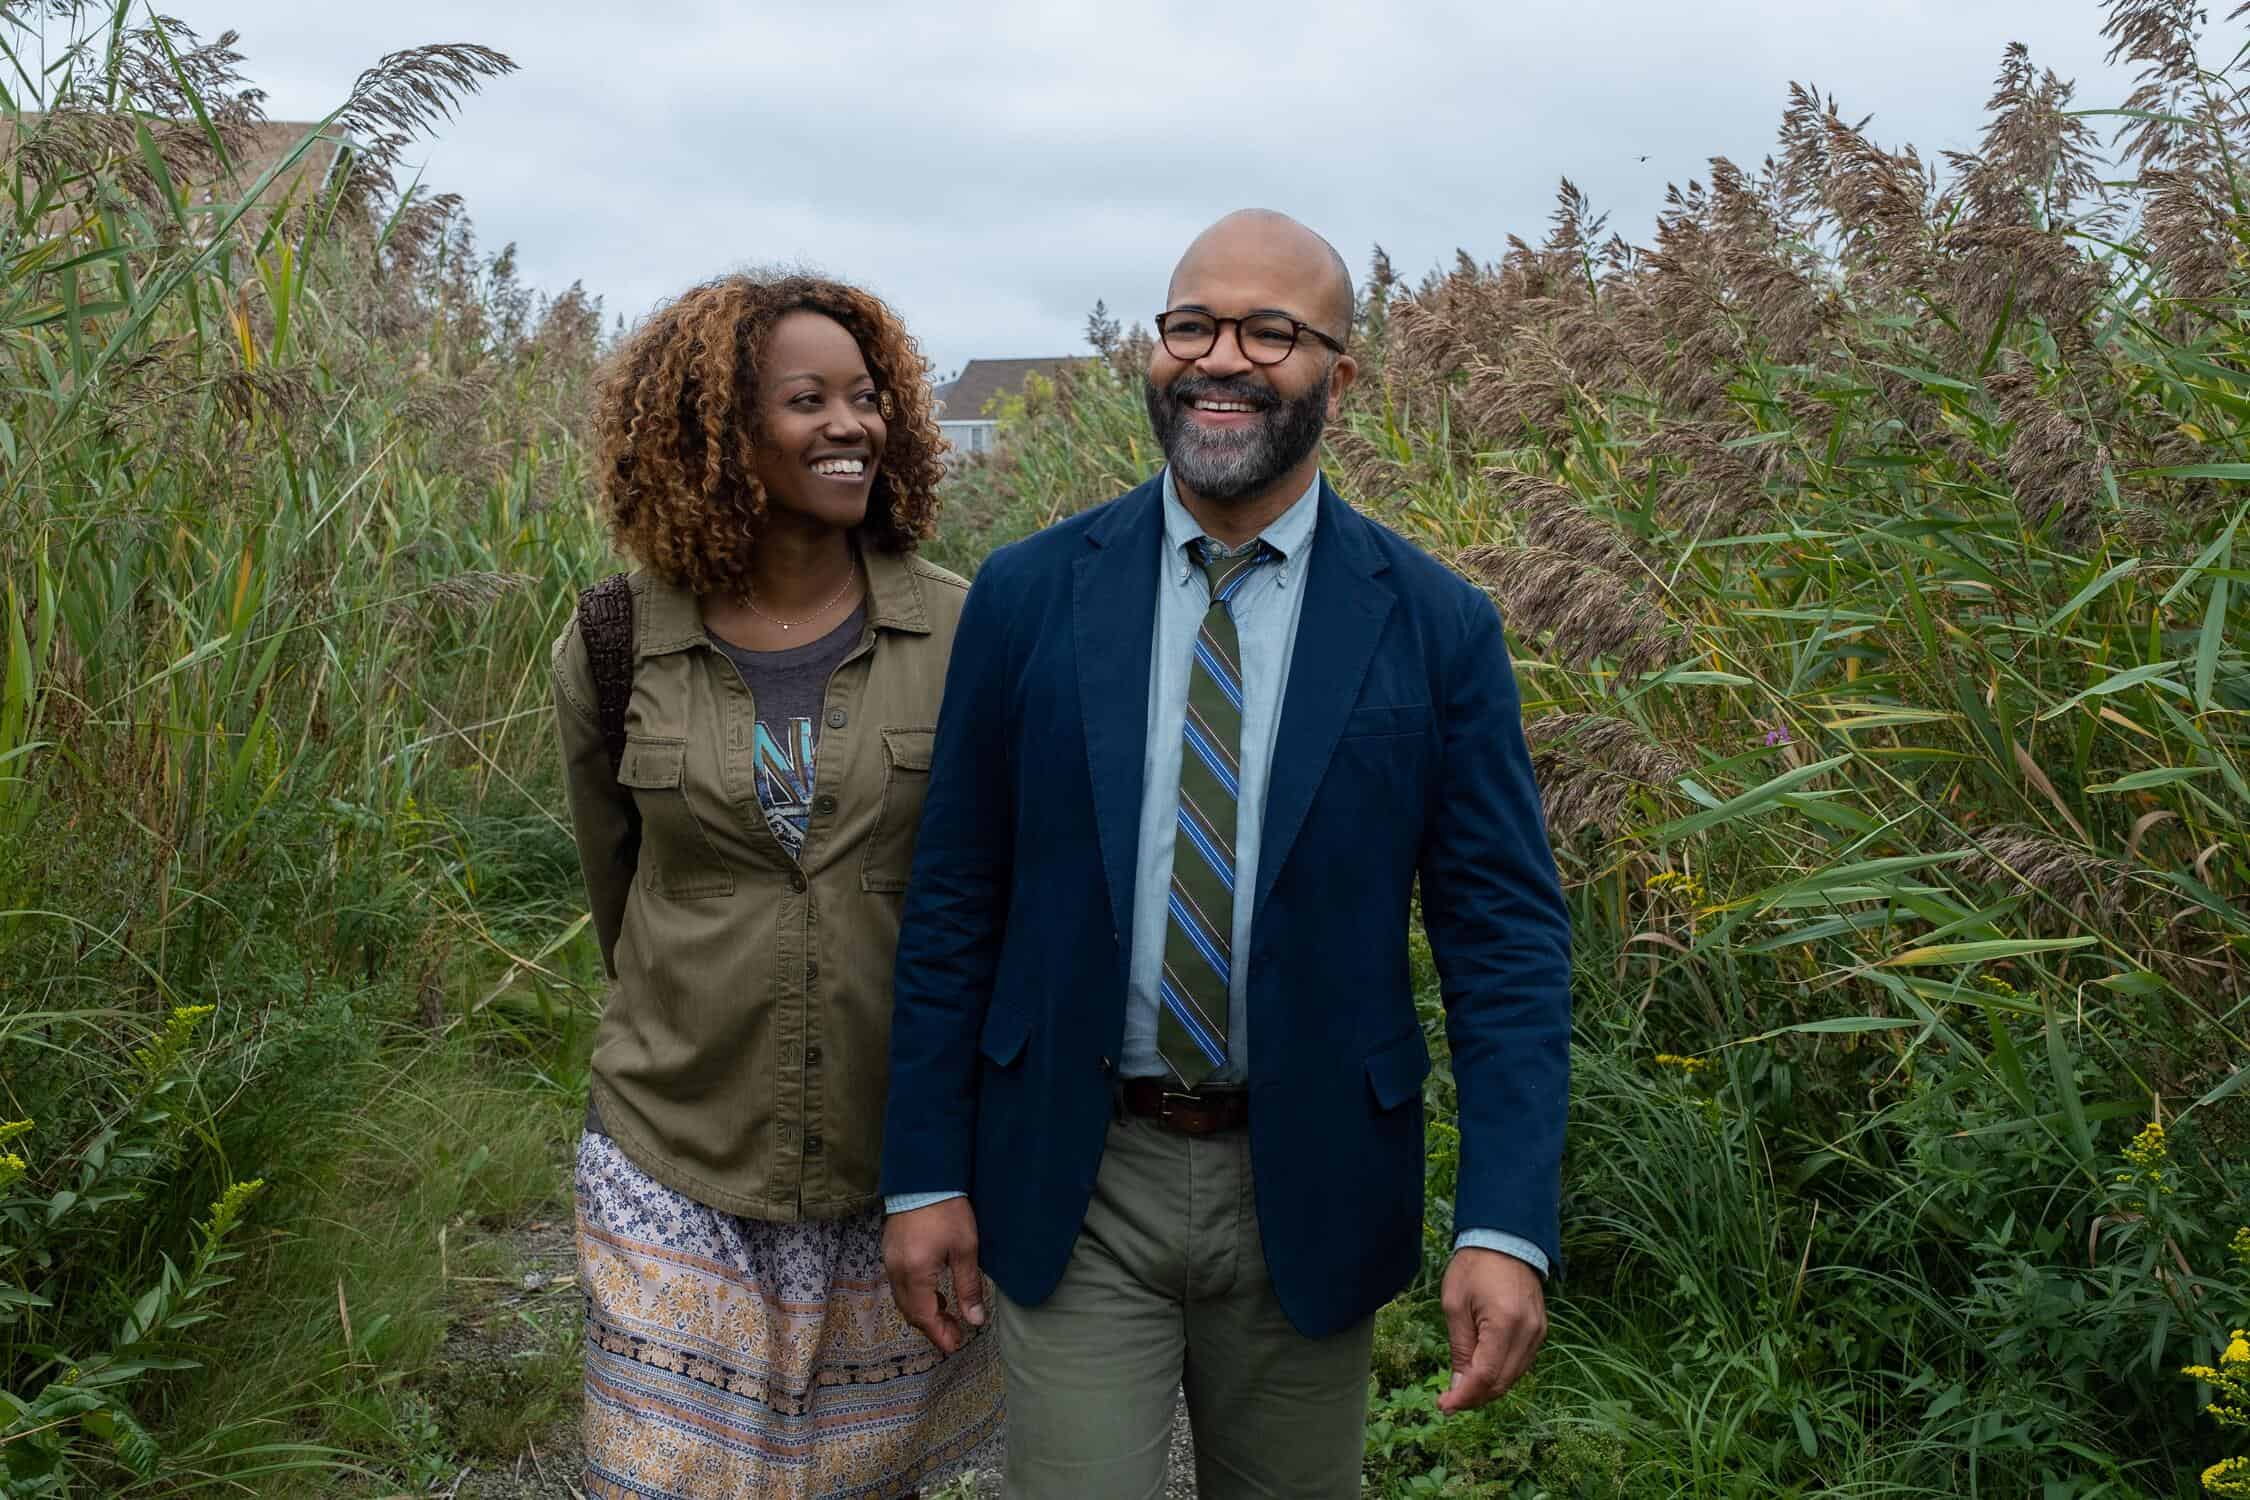 A well-dressed man and woman walk through tall grasses in this image from 3 Arts Entertainment.